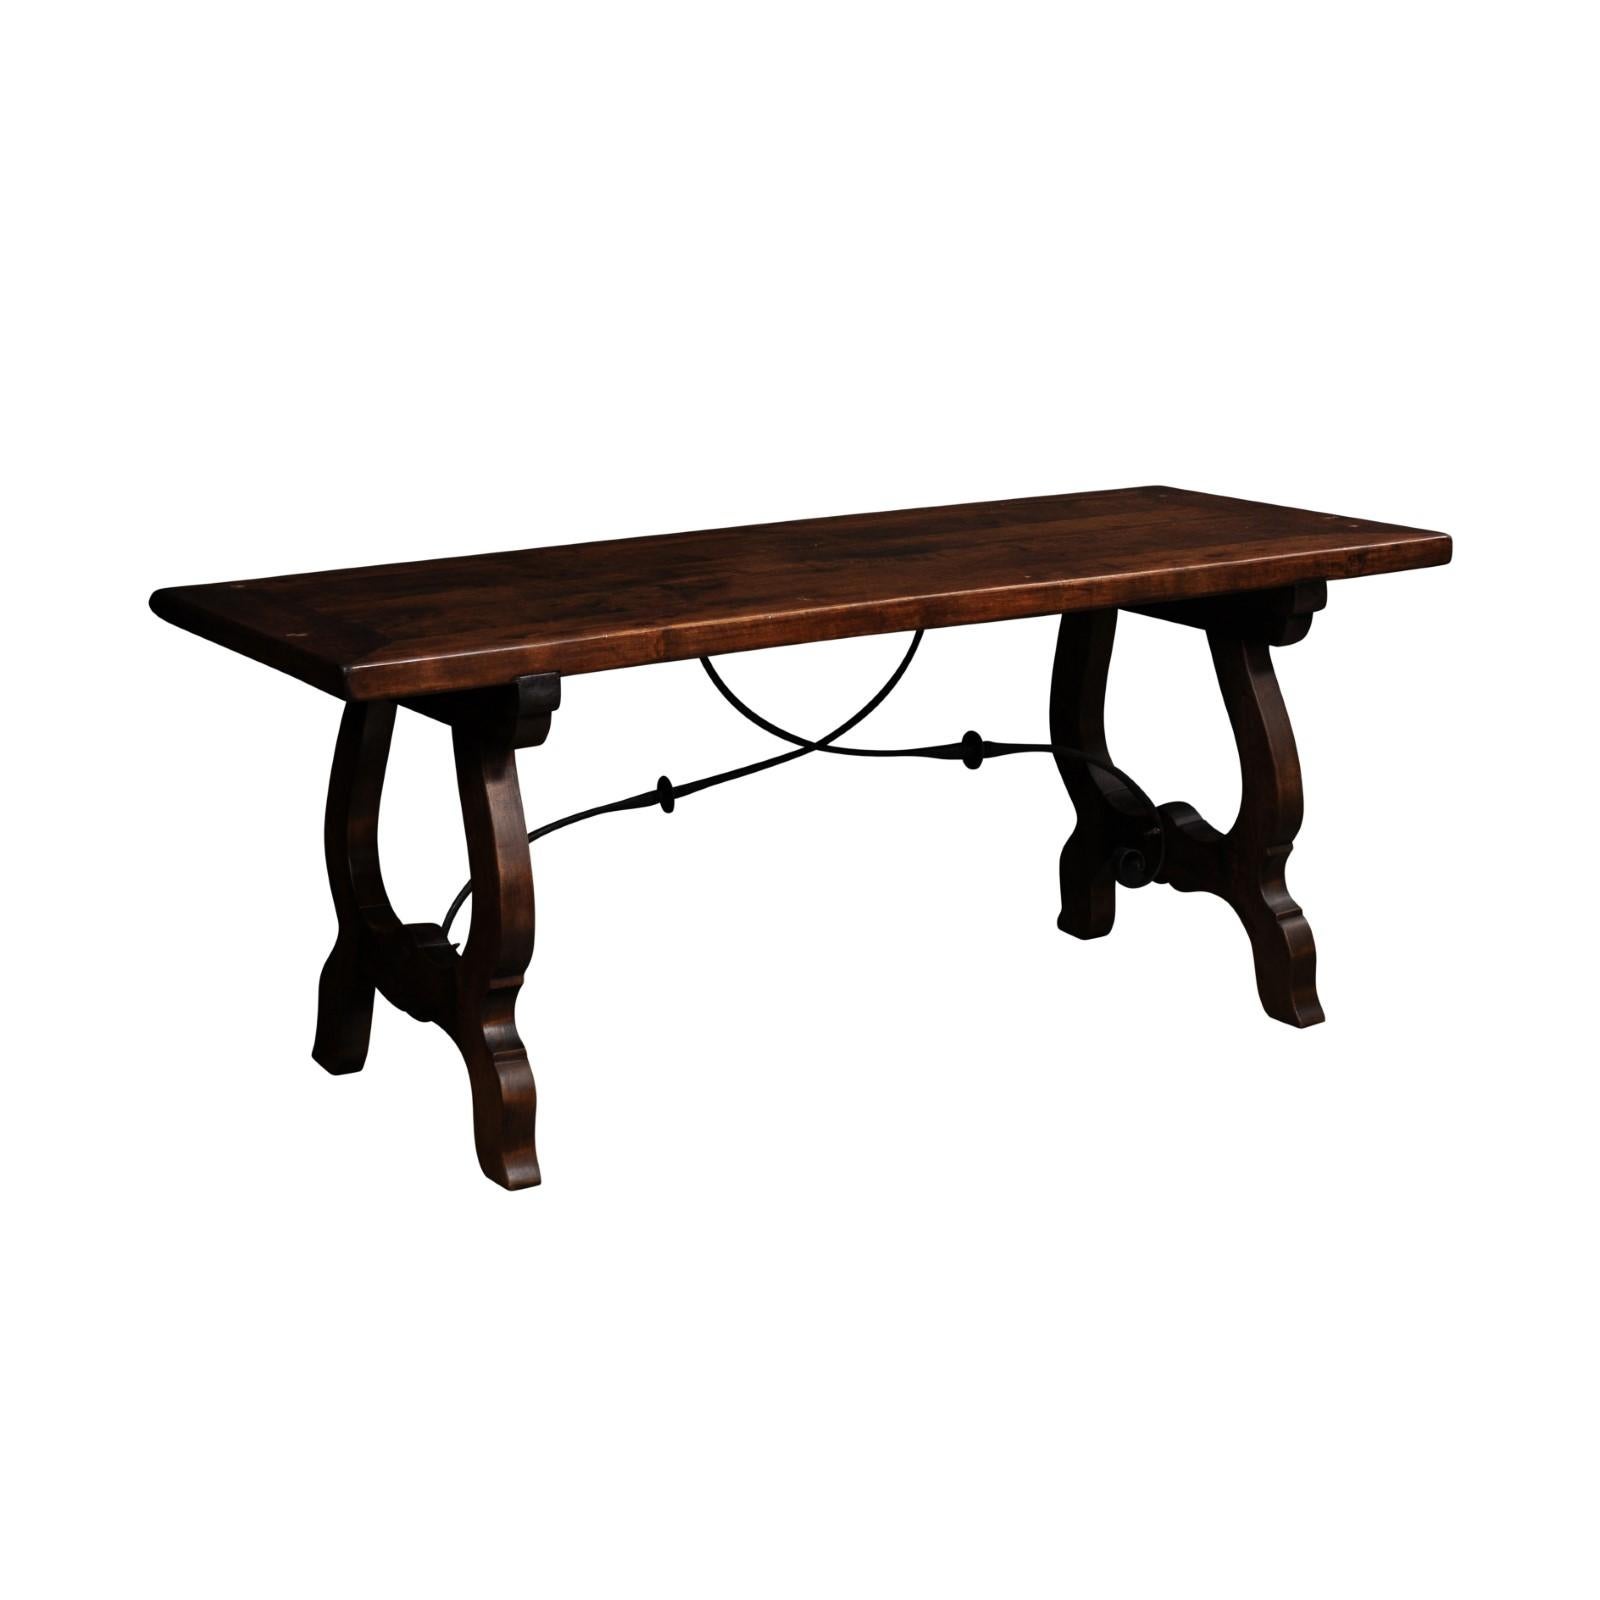 A Spanish Baroque style walnut fratino table with carved lyre shaped base and iron stretcher. Immerse yourself in the opulent world of Spanish Baroque style with this exquisite walnut fratino table, a piece that masterfully combines the drama and